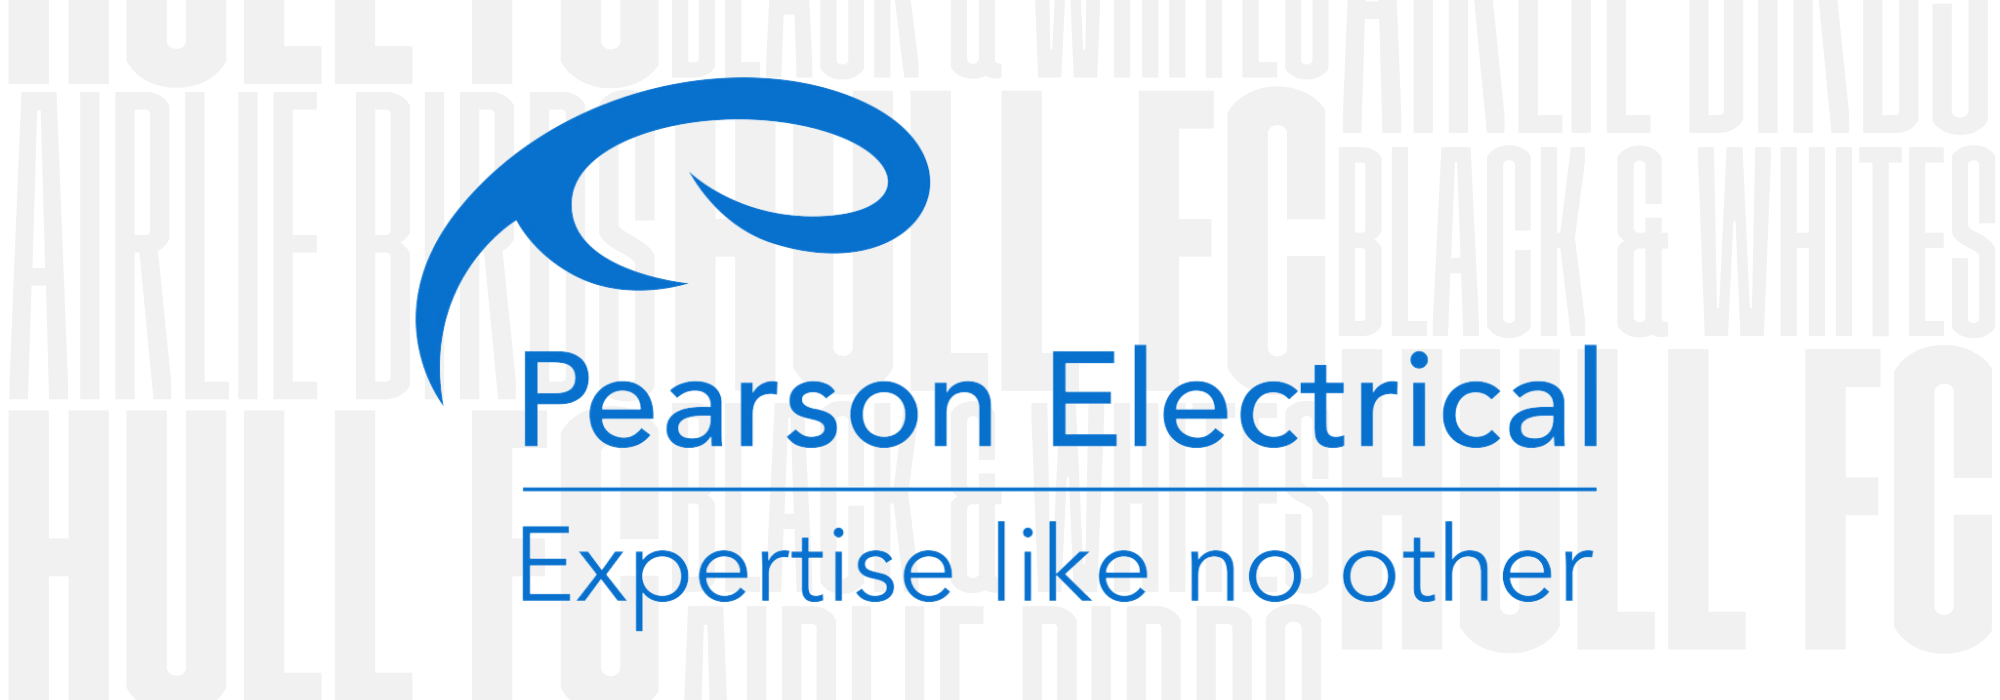 Pearson Electrical Become Reserves & Academy Principal Sponsor For 2022